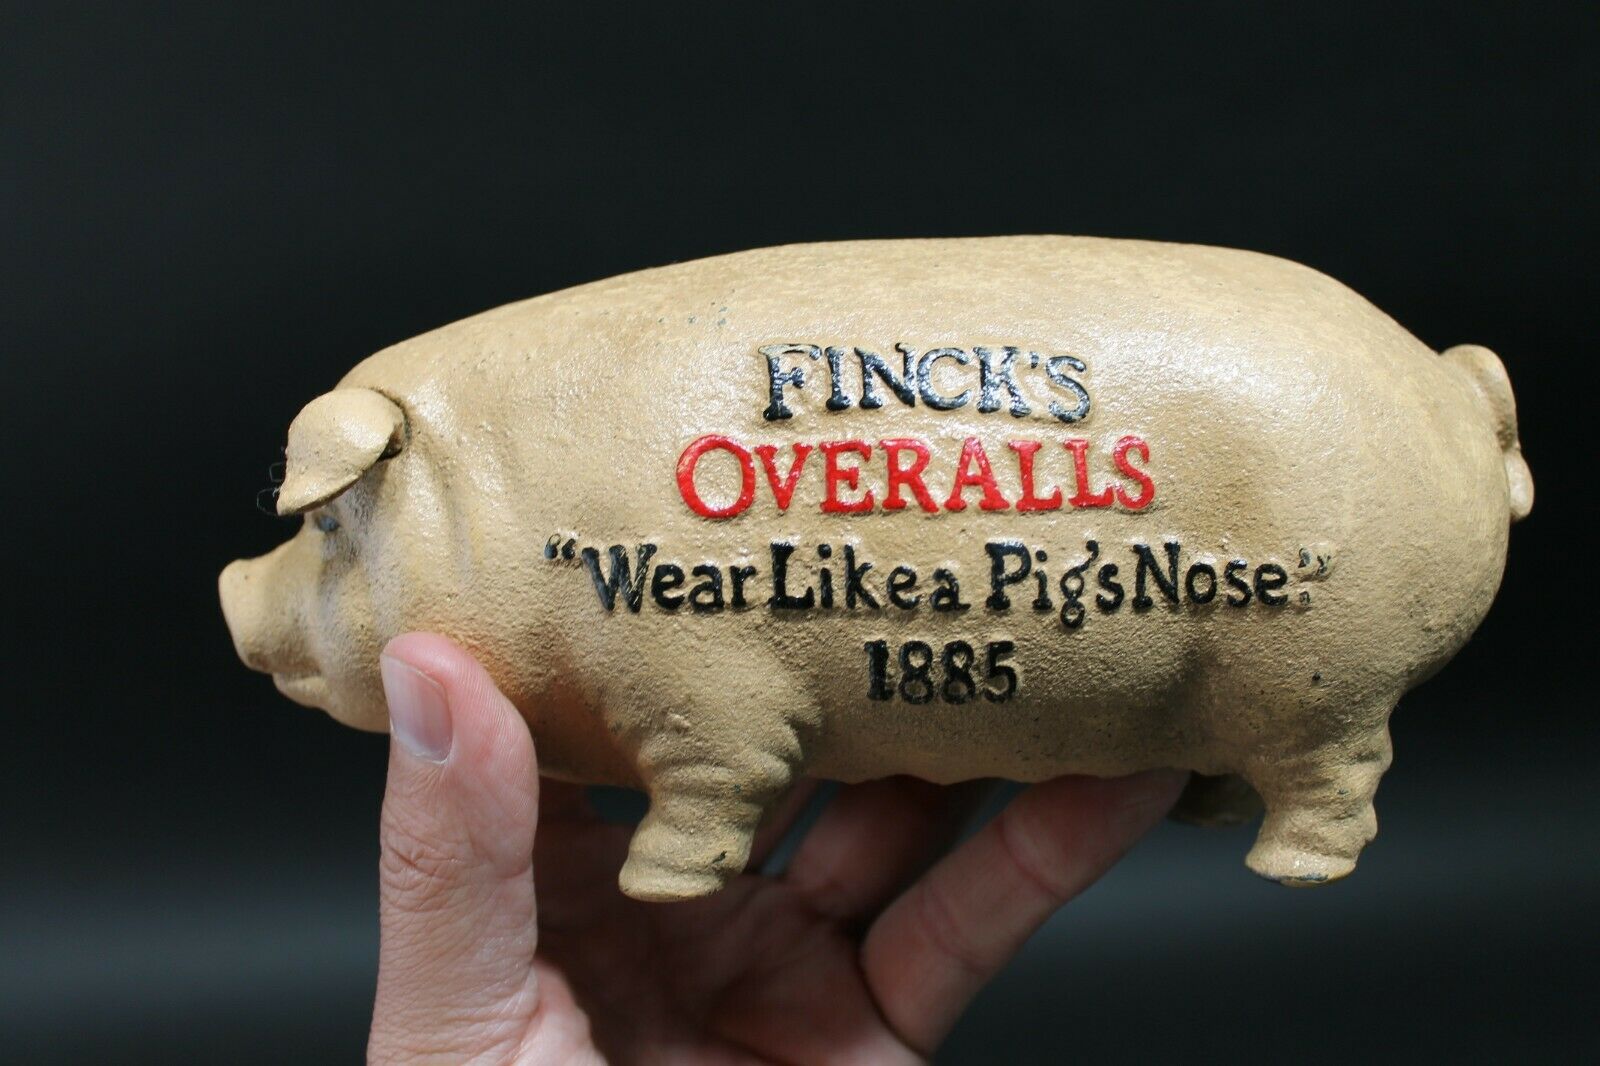 FINCK'S "OVERALLS" 'WEAR LIKE A PIG'S NOSE' 1885 Cast Iron Coin Bank - Early Home Decor